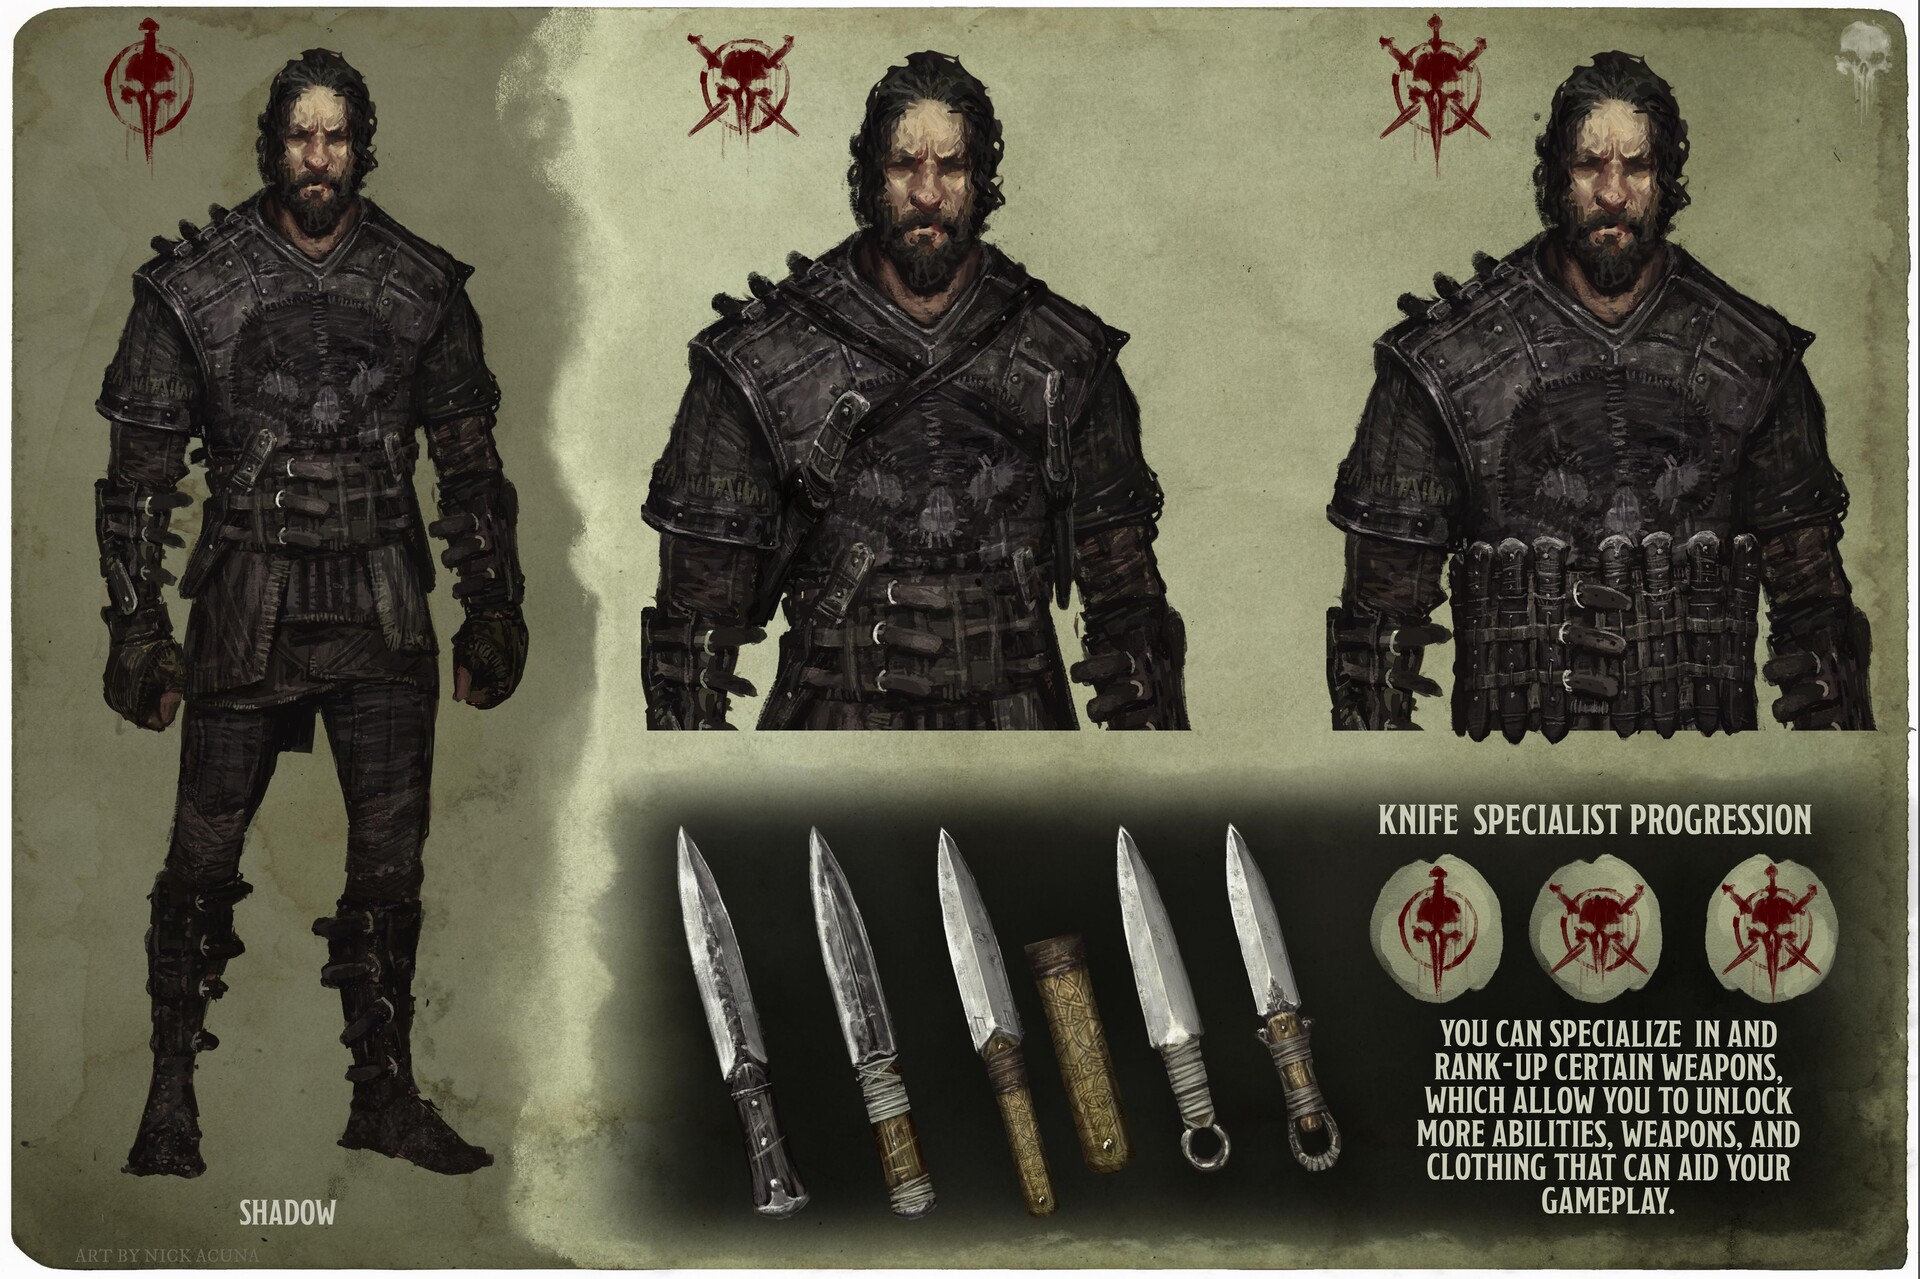 Medieval Punisher - light armor outfits and weapons